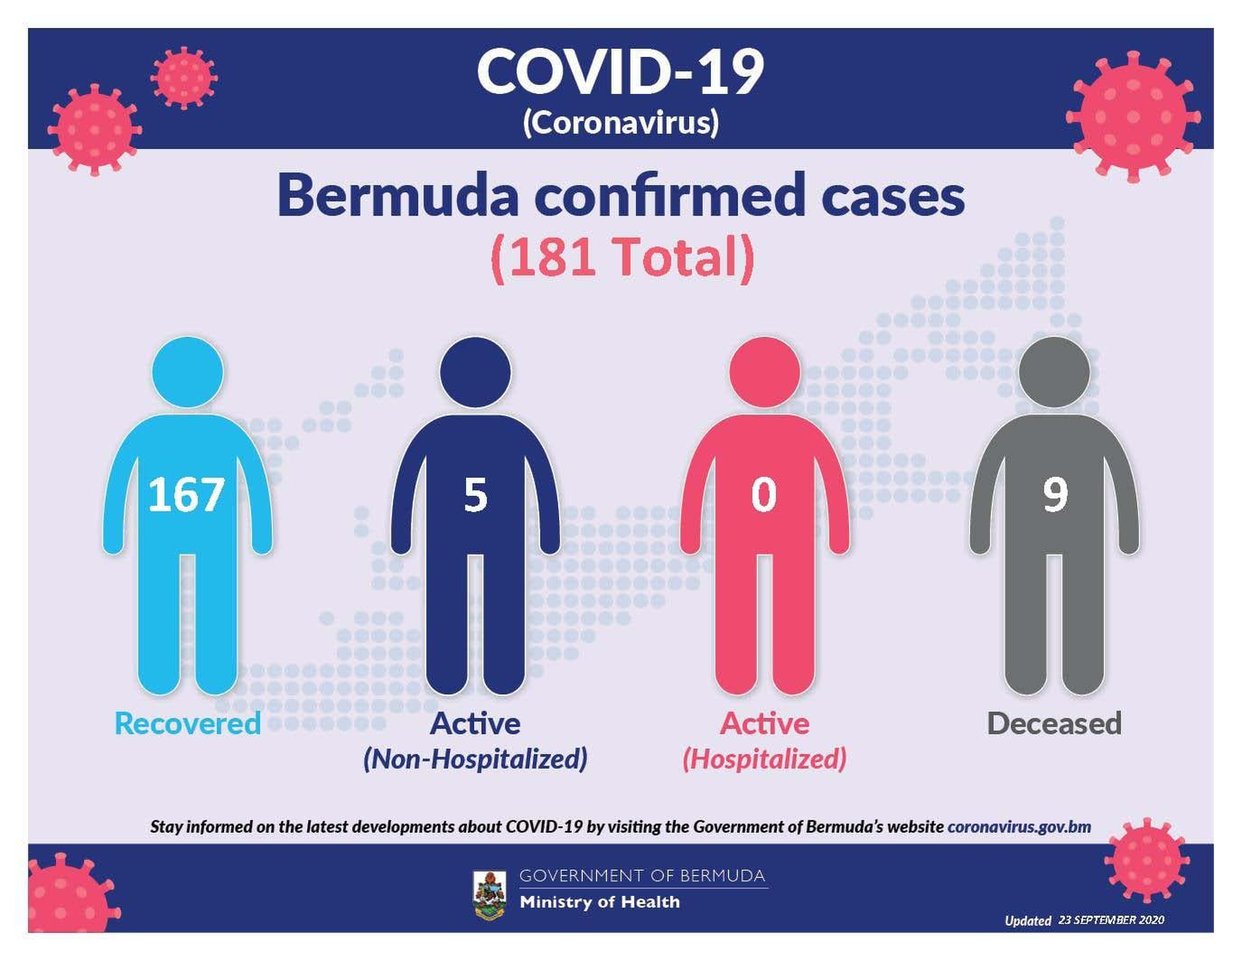 No new COVID-19 cases reported in Bermuda, 25 September